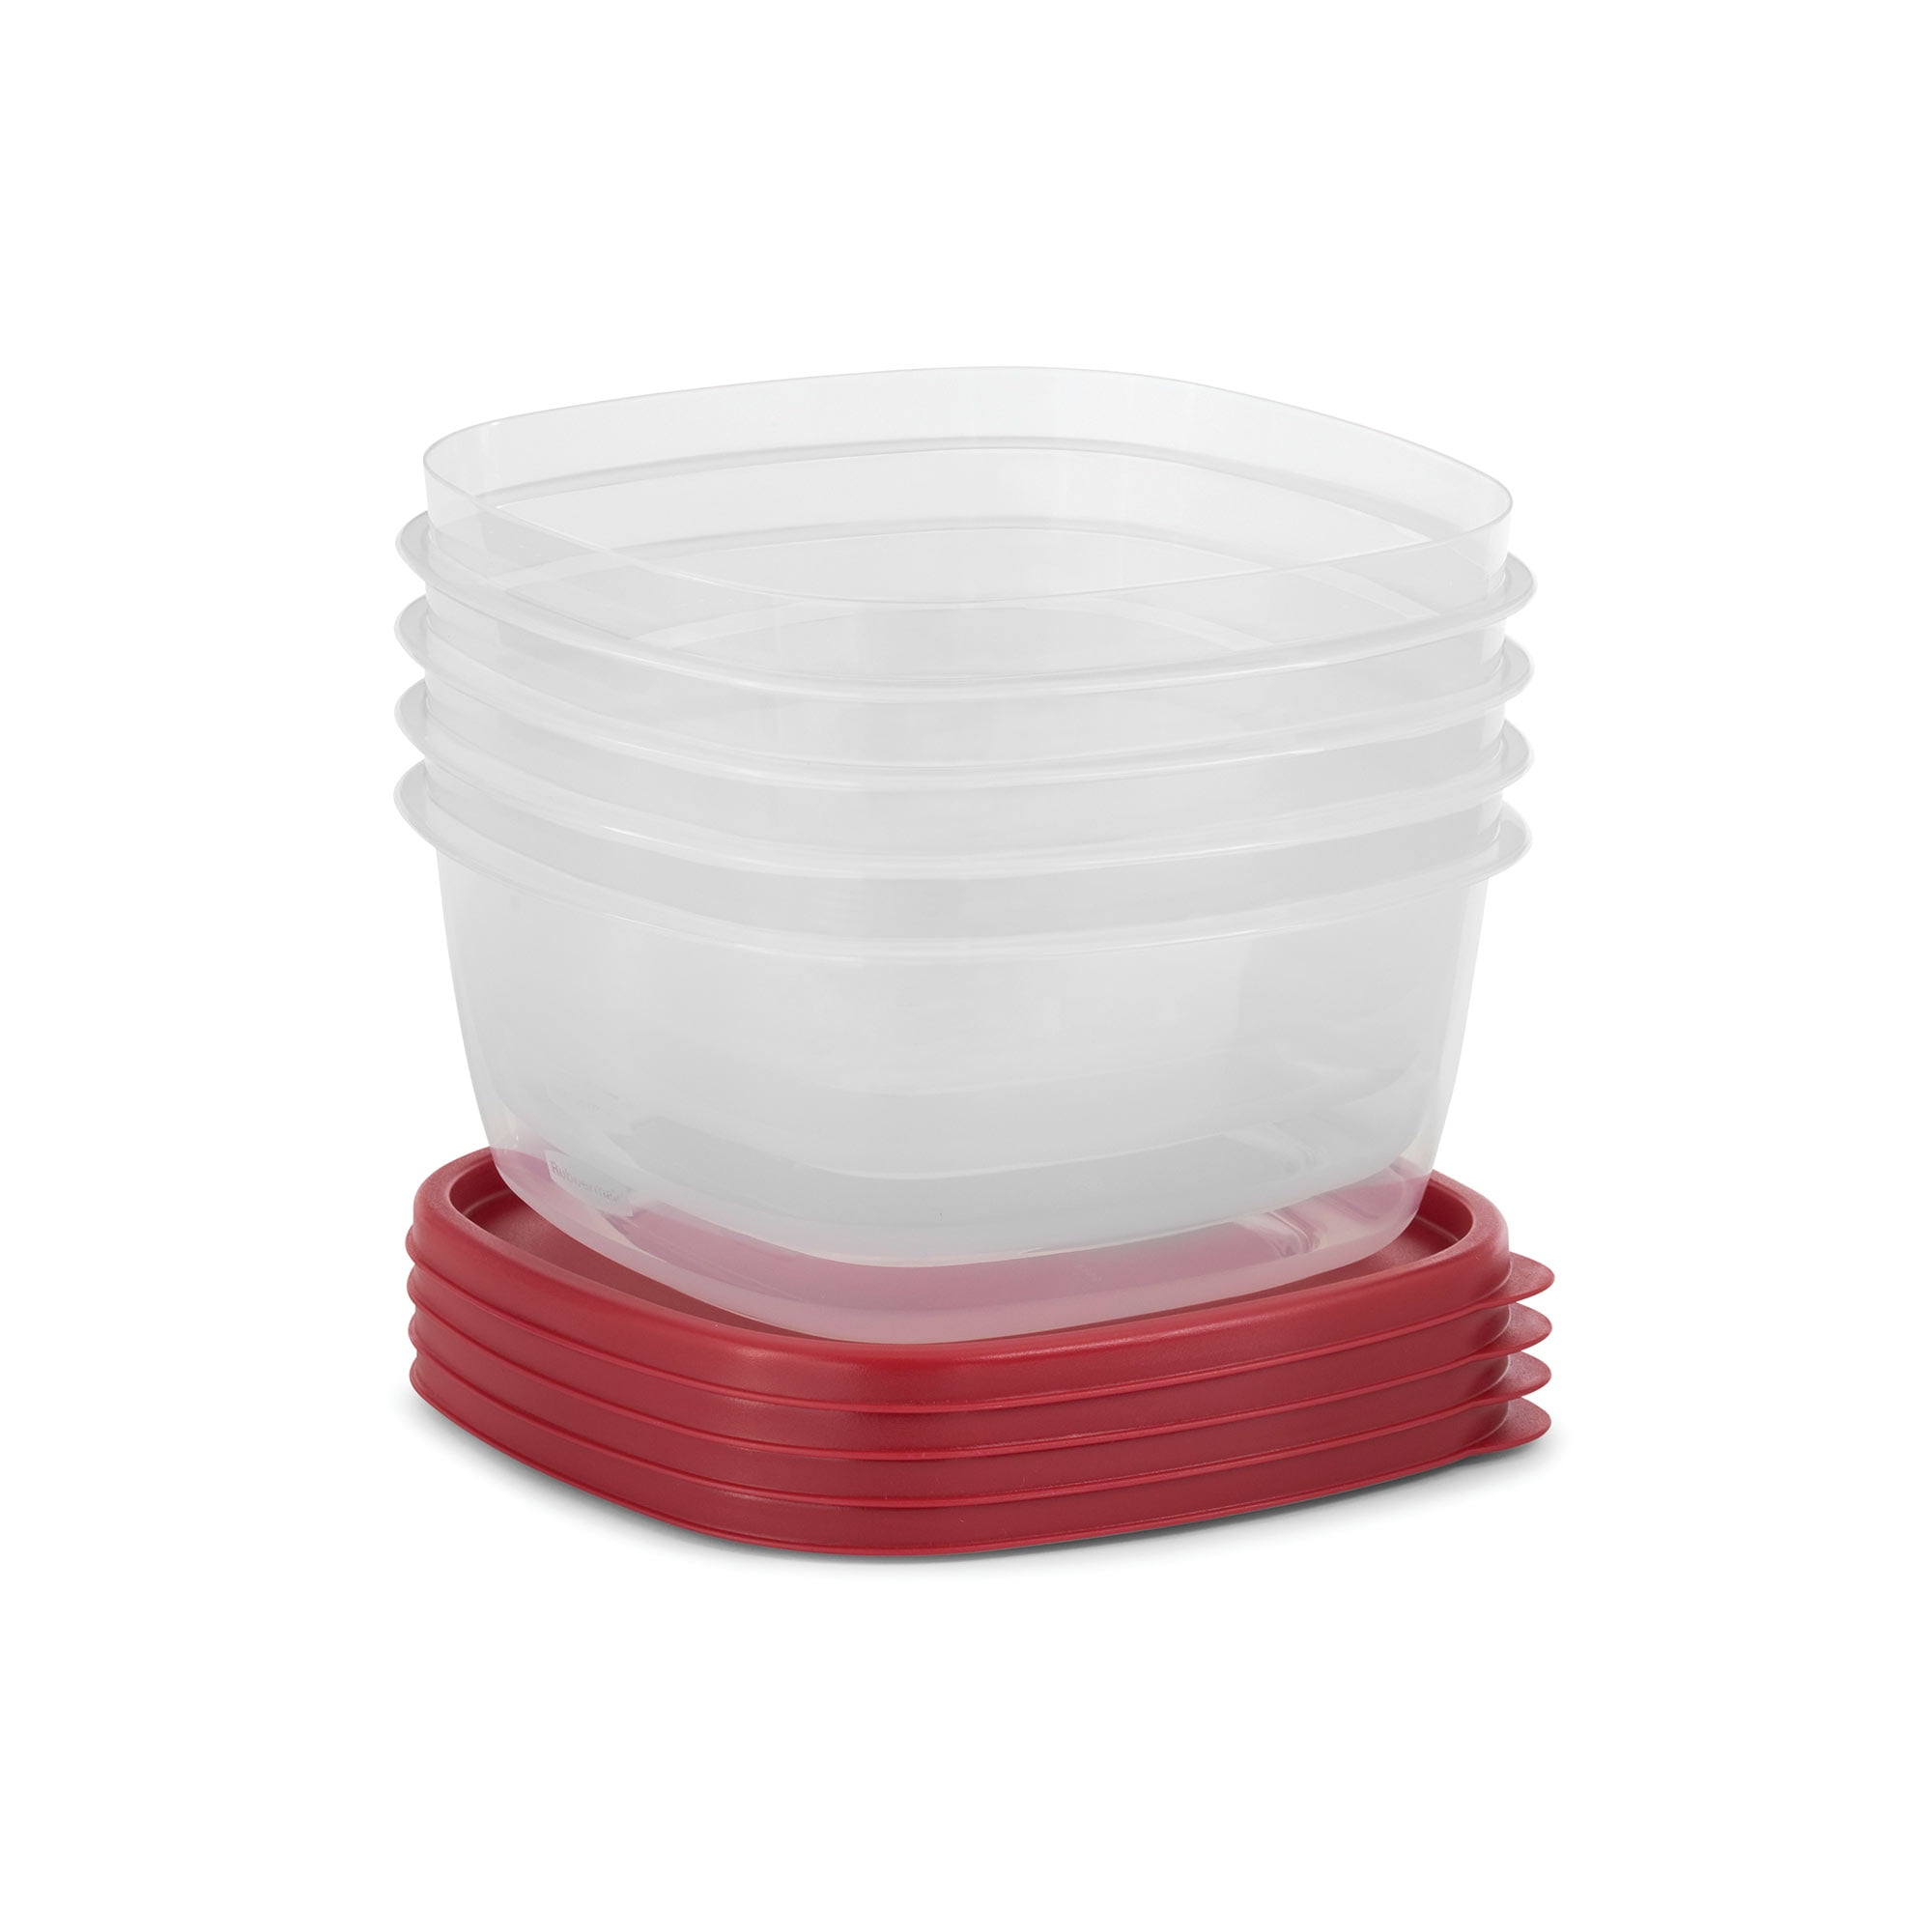 Rubbermaid 1776401 1 1/4-Cup Easy Find Lid Food Storage Container, Square,  6 pack